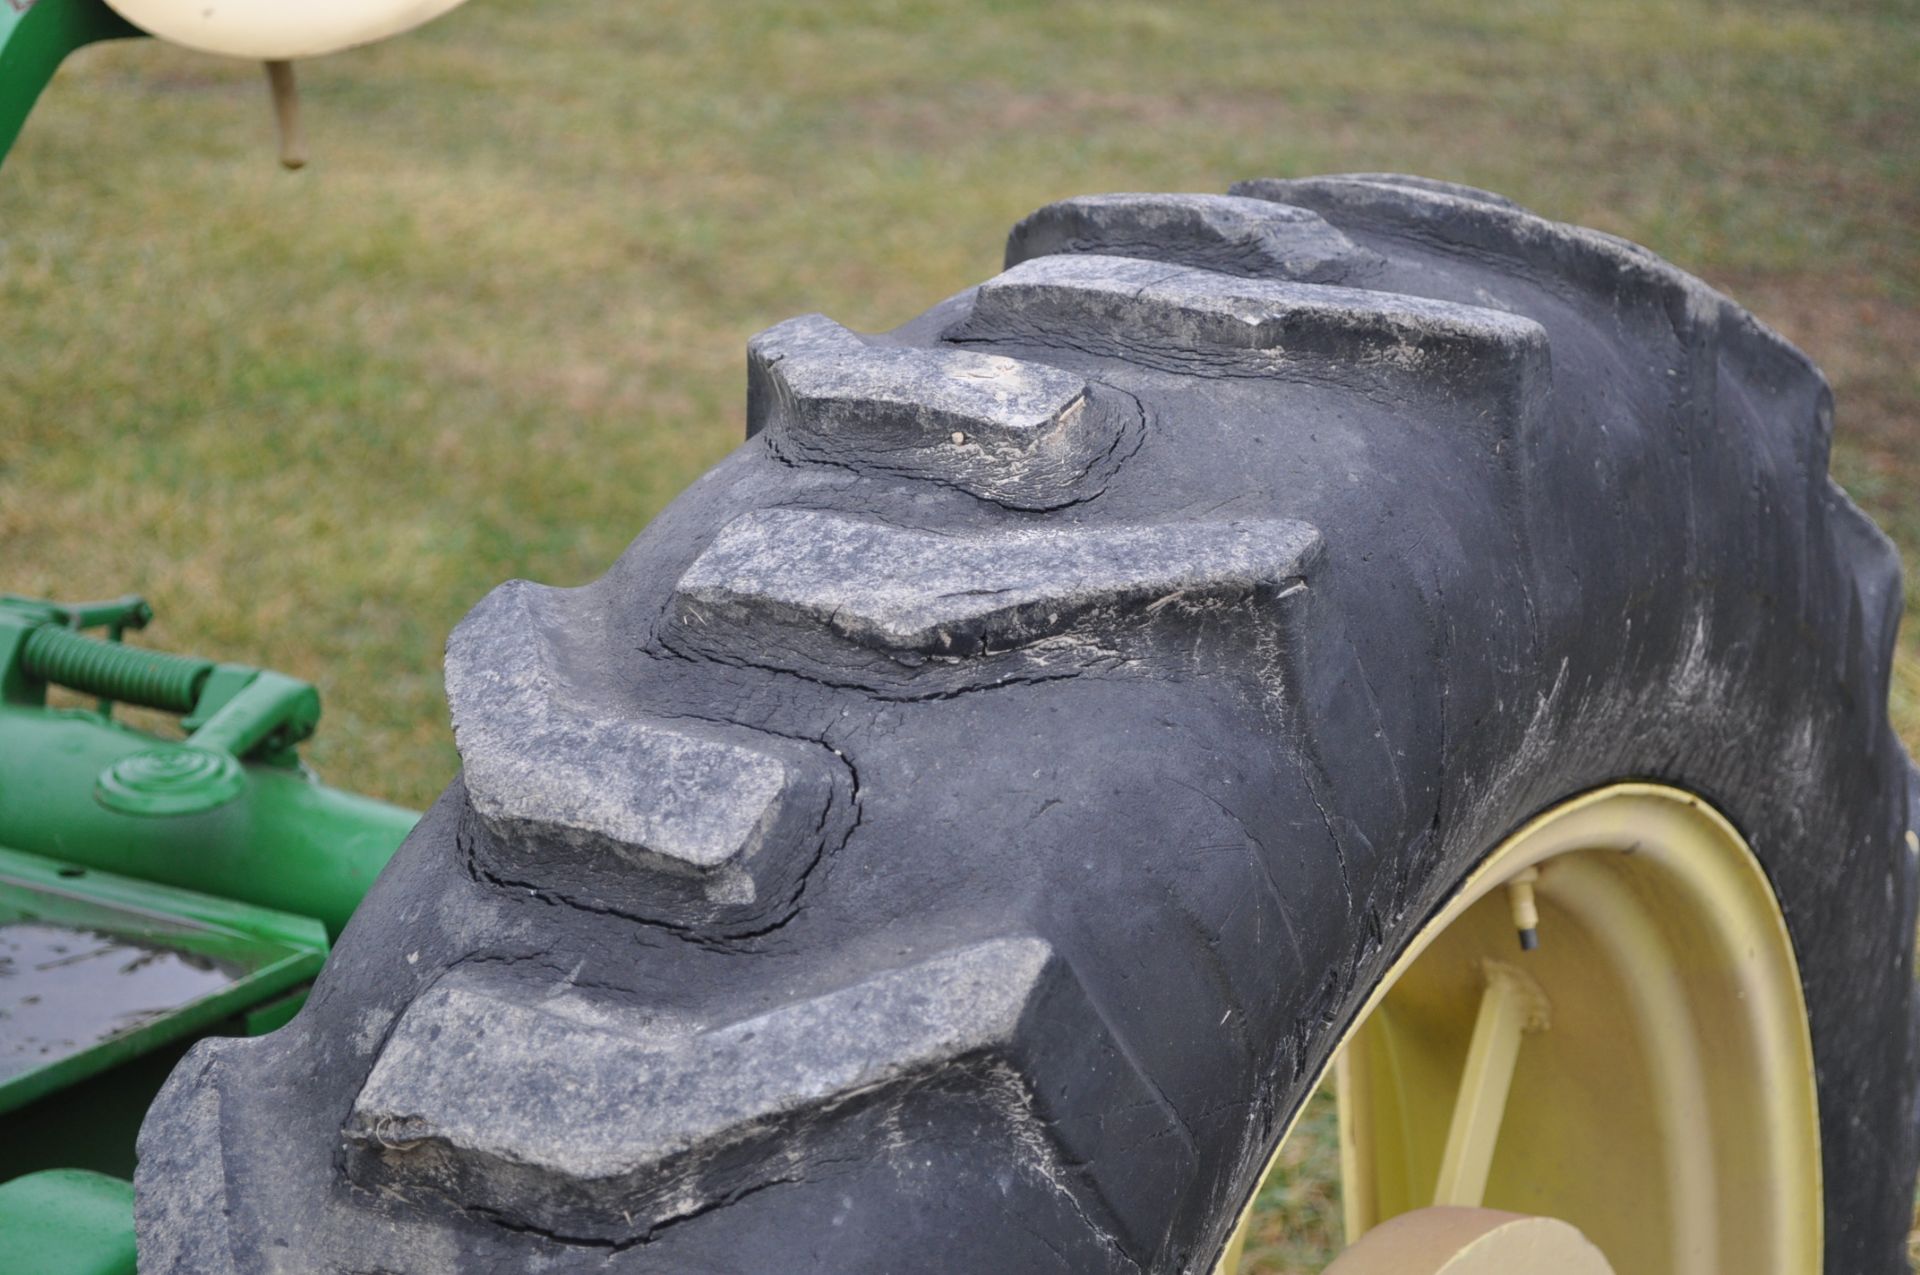 1937 John Deere Unstyled A, 11-36 tires, narrow front, 540 pto, SN 457396 - Image 6 of 12